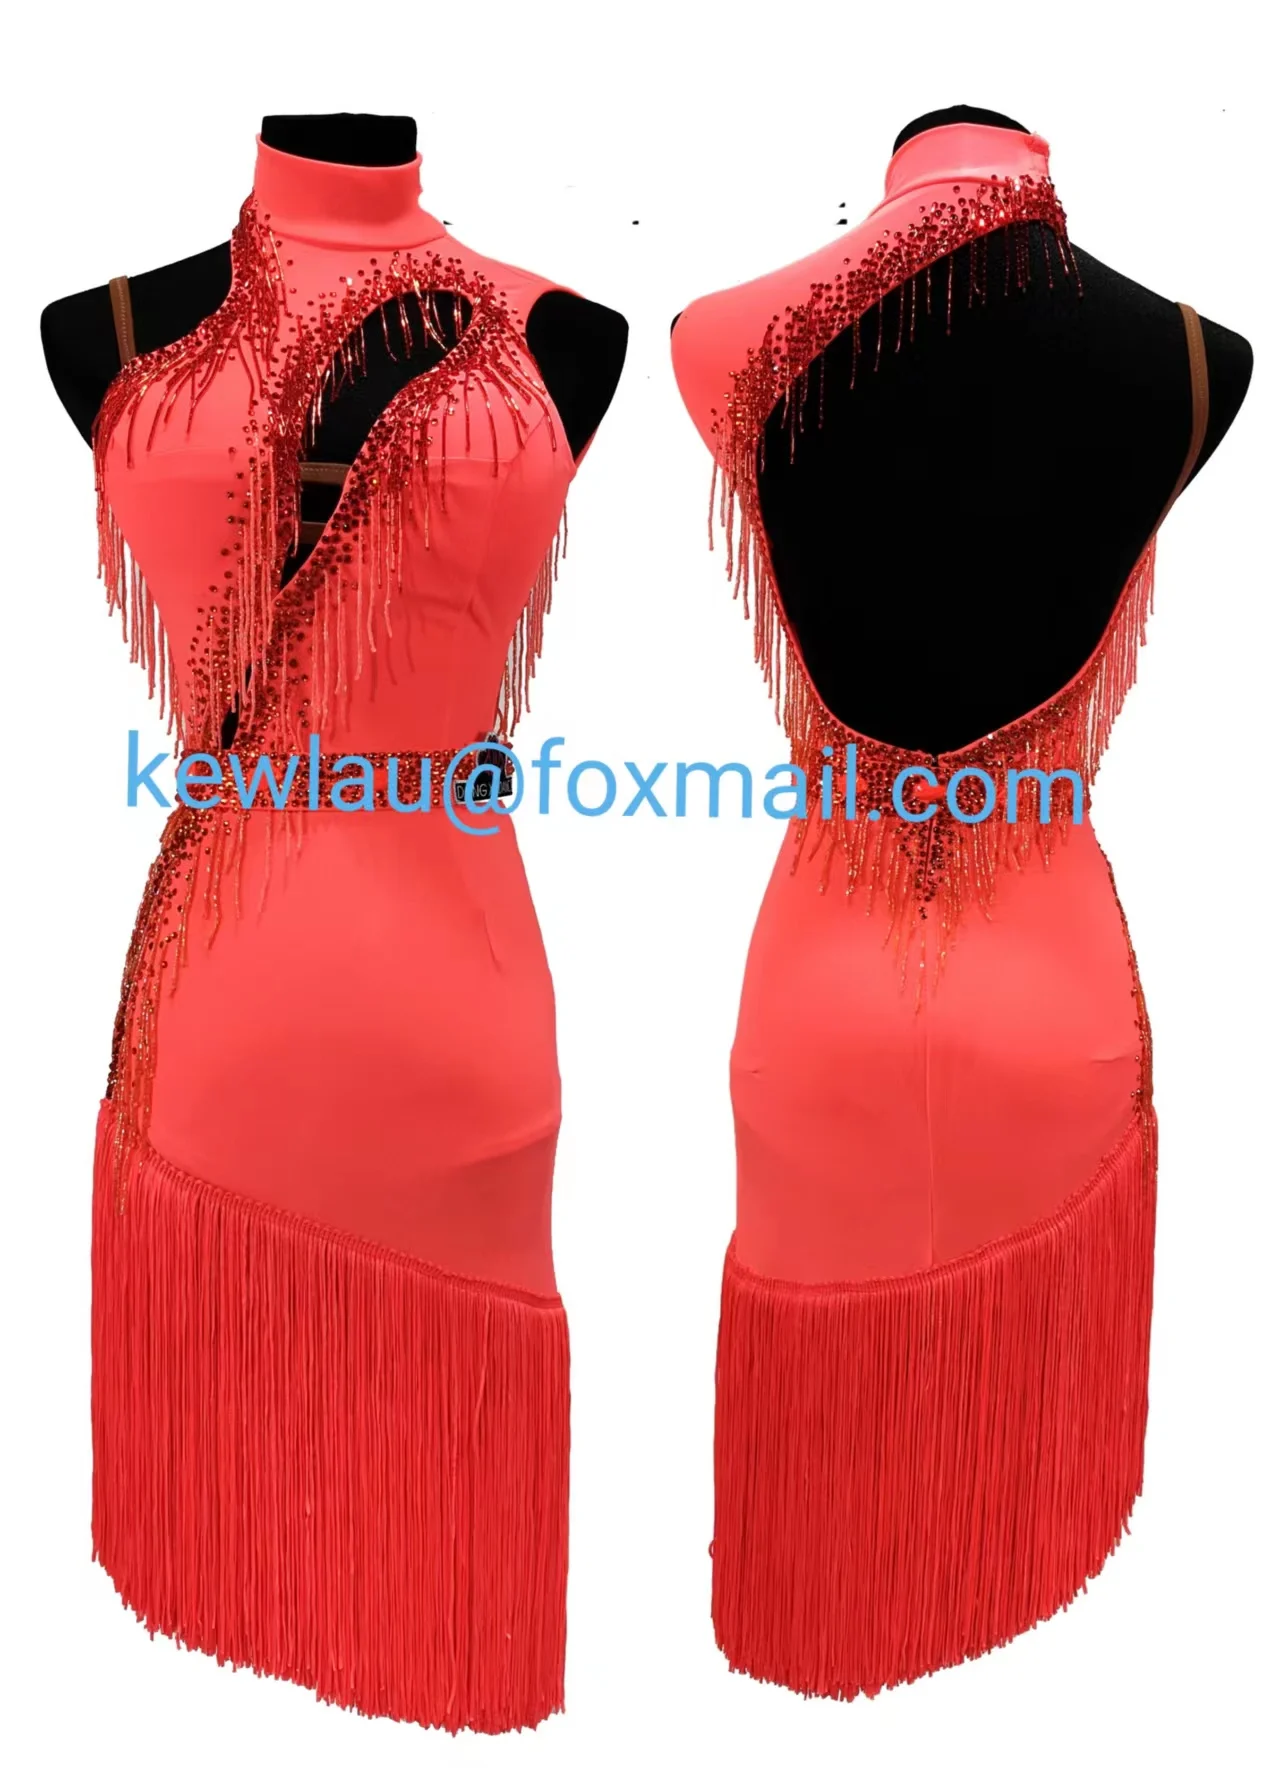 

WHY NOT DANCE Tube fringe String Latin Rumba Dance Competition Orange Dress For Girls Fast Free Shipping